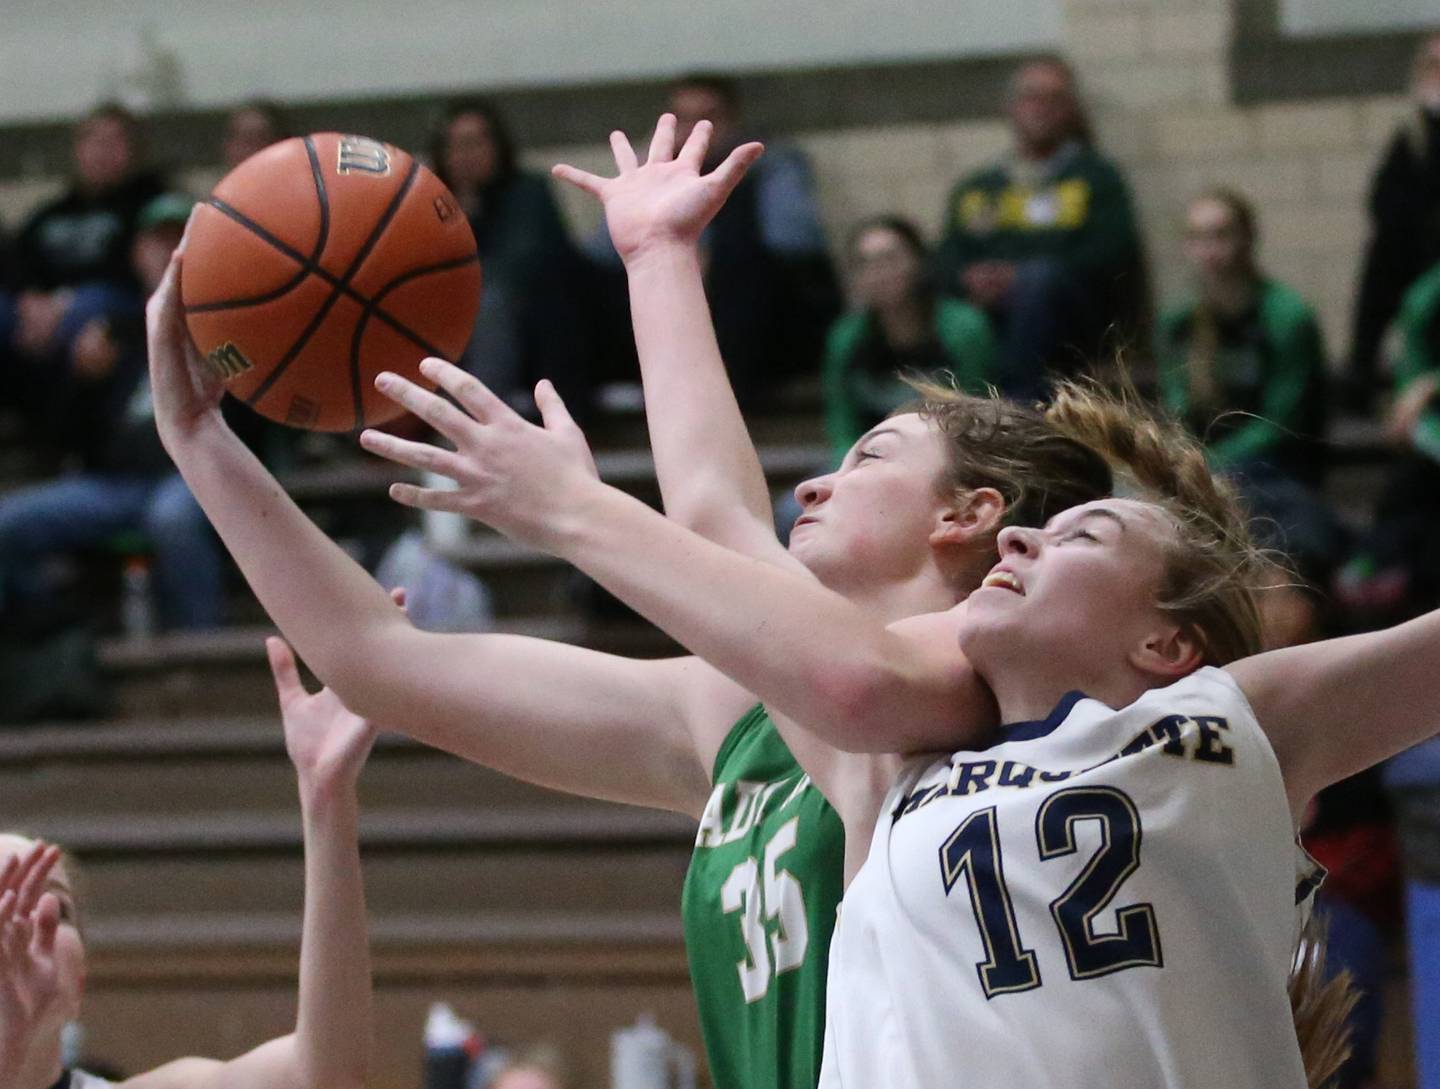 Seneca's Tessa Krull and Marquette's Lily Craig jump in the air to grab a rebound in Bader Gym on Monday, Jan. 23, 2023 at Marquette High School.